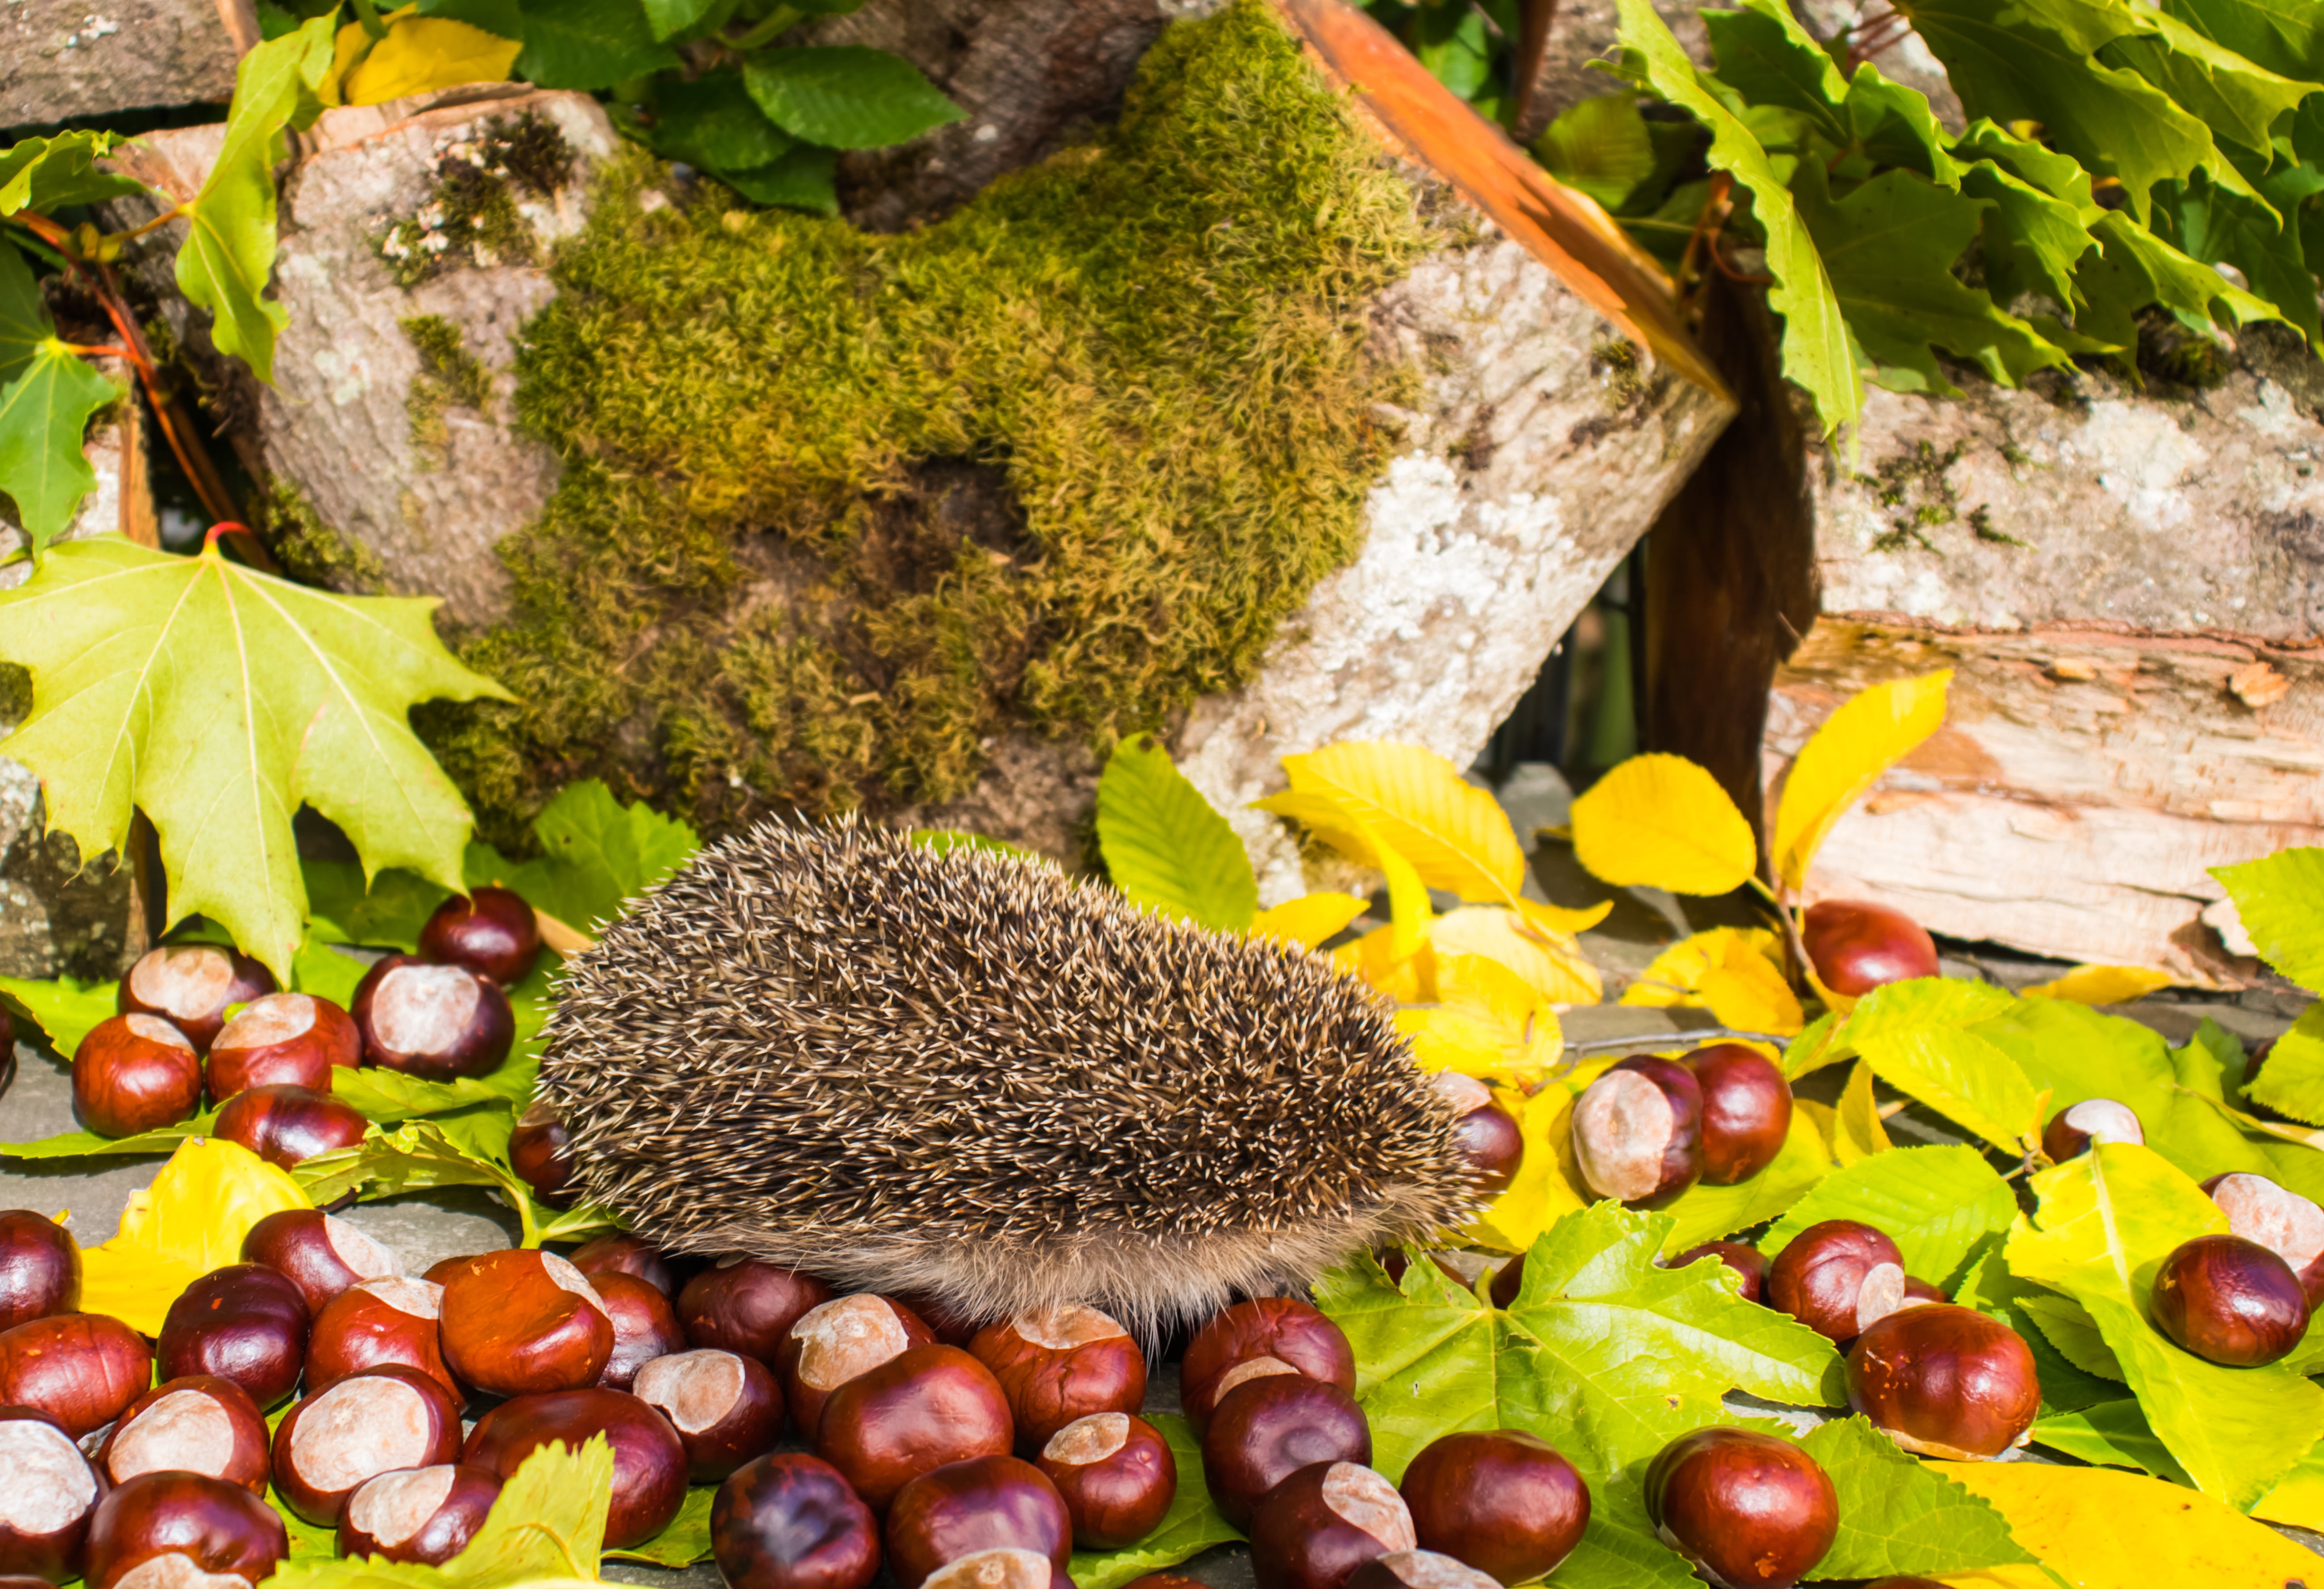 Hedgehog and autumn still life of chestnuts and leaves under the sun.